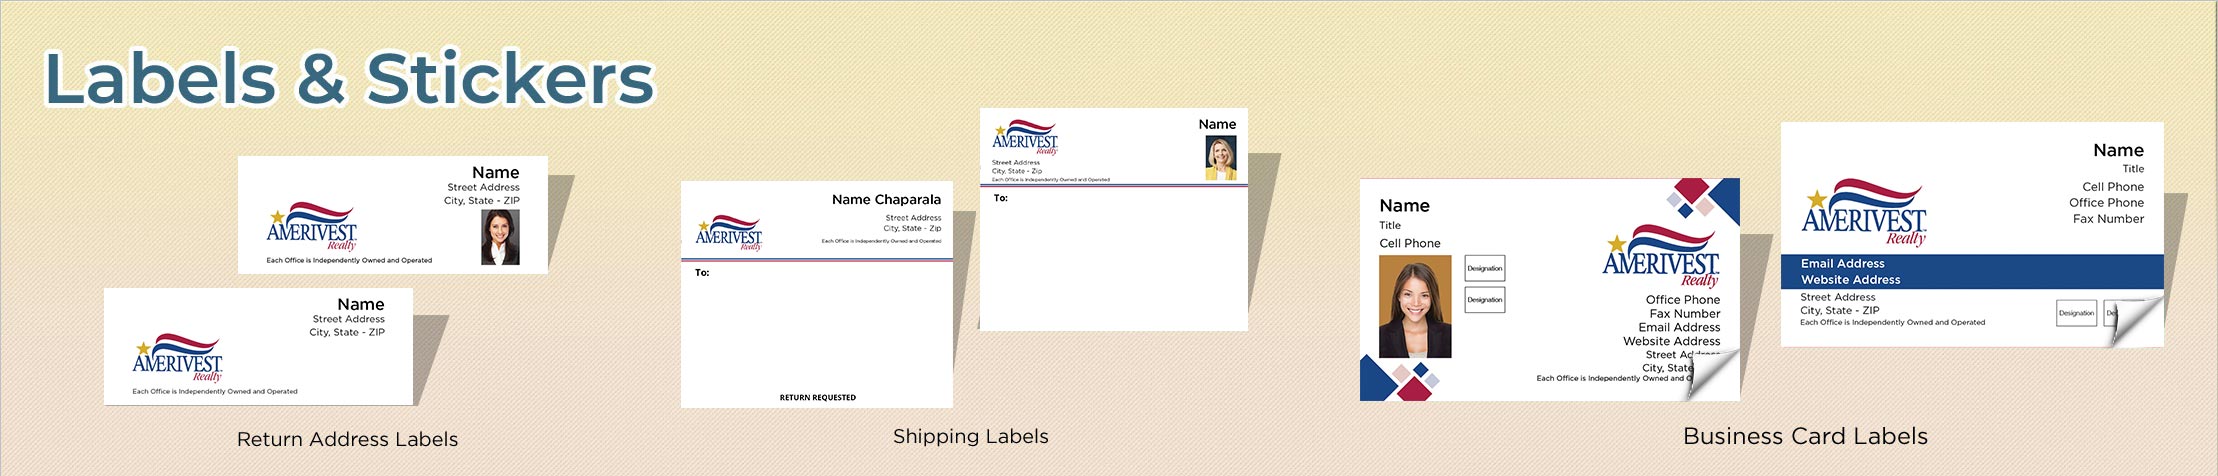 Amerivest Realty Real Estate Labels and Stickers - Amerivest Realty  business card labels, return address labels, shipping labels, and assorted stickers | BestPrintBuy.com